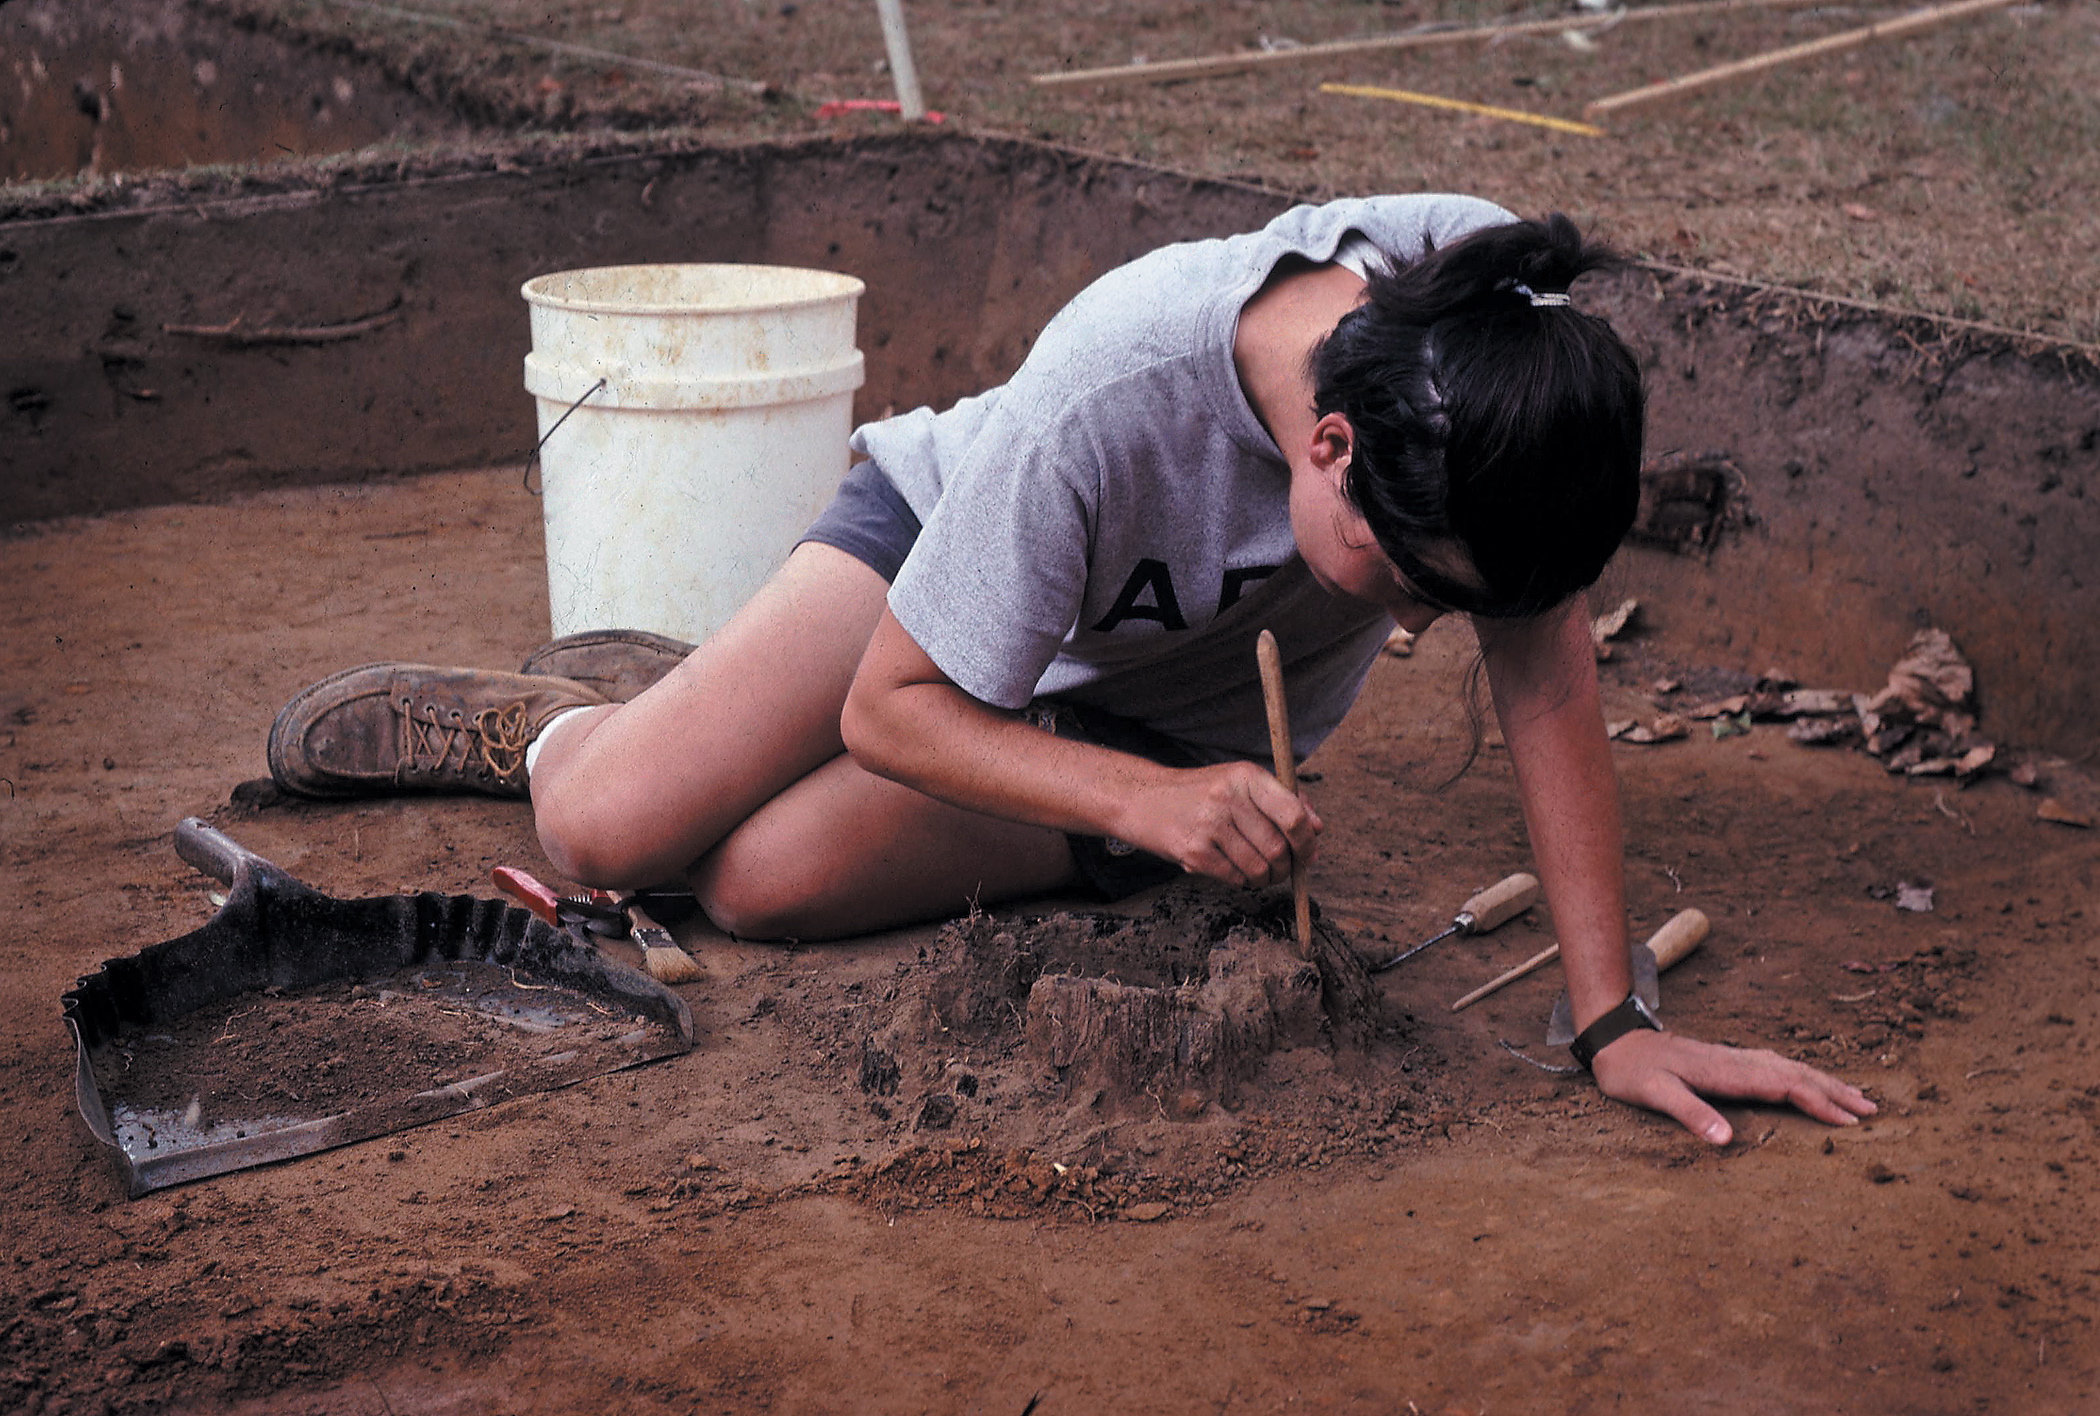 Graduate student carefully excavates the remains of a charred post.